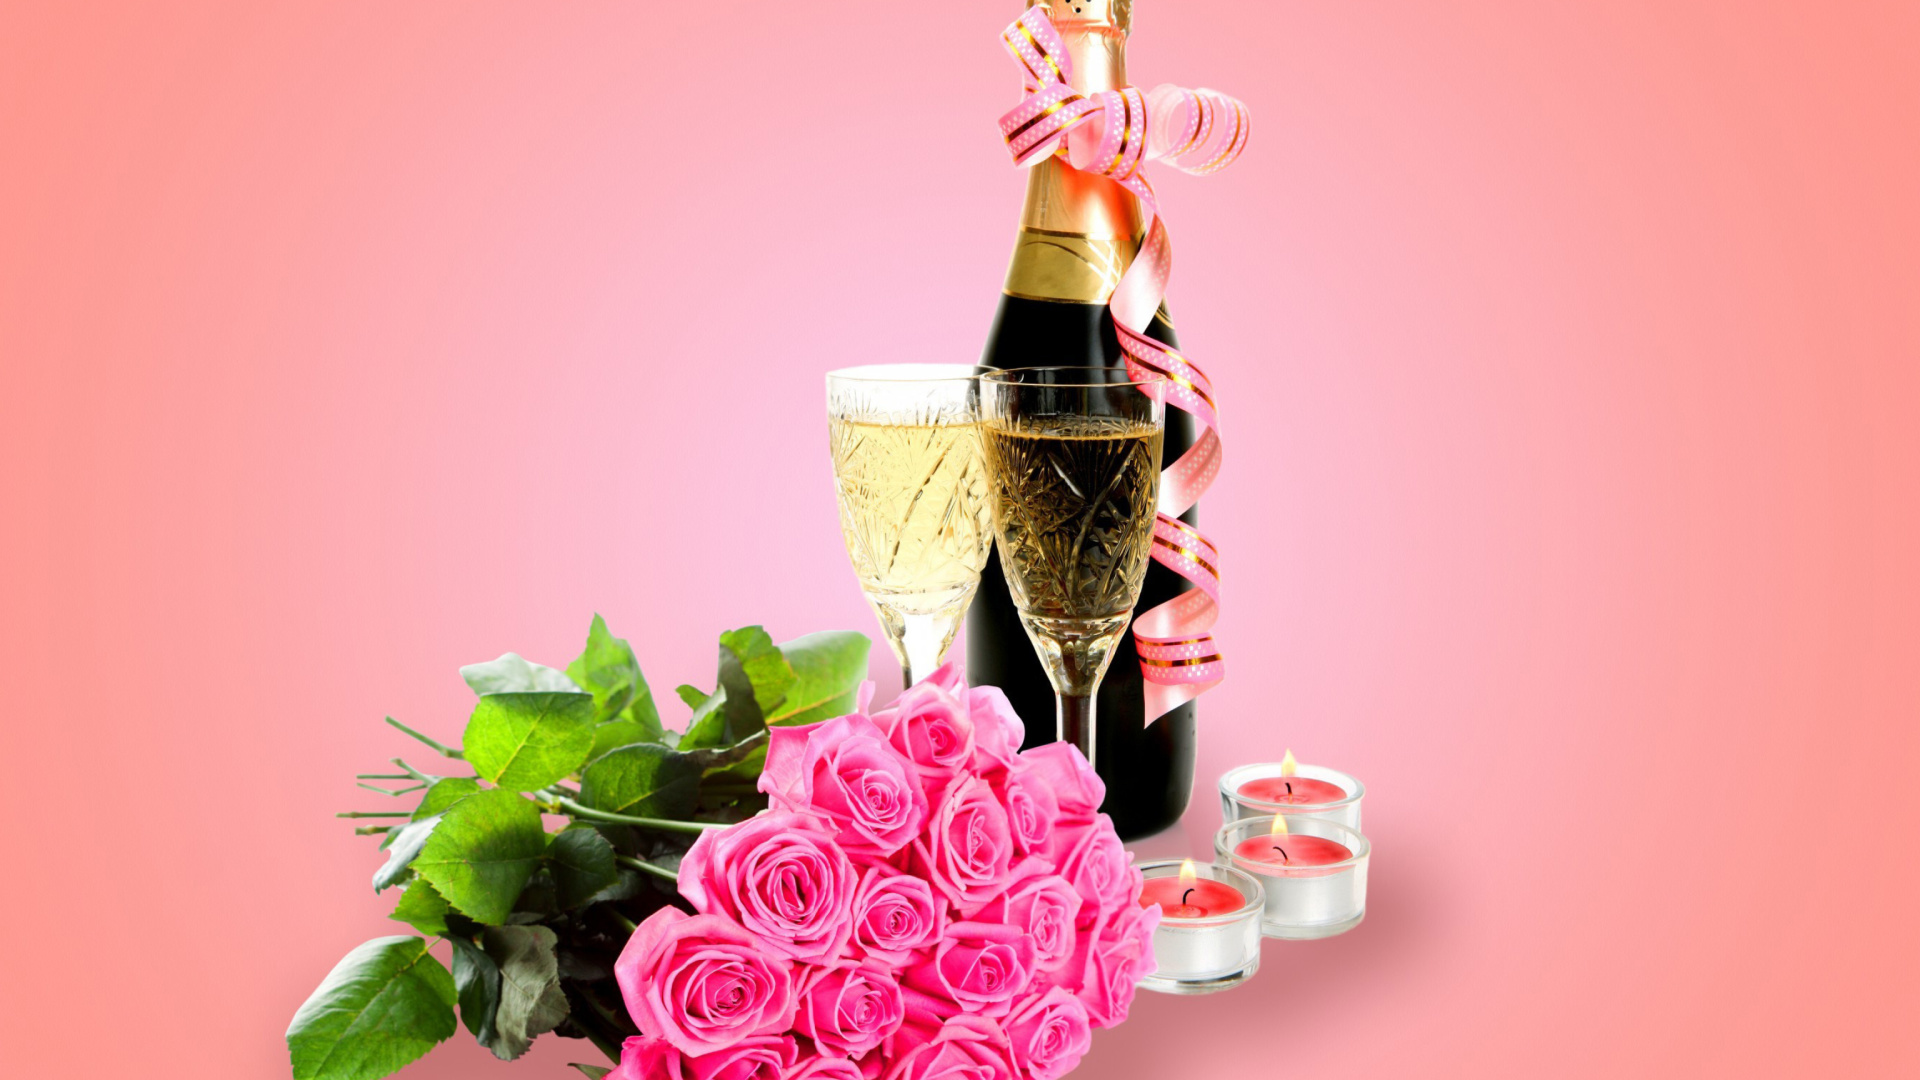 Clipart Roses Bouquet and Champagne wallpaper 1920x1080